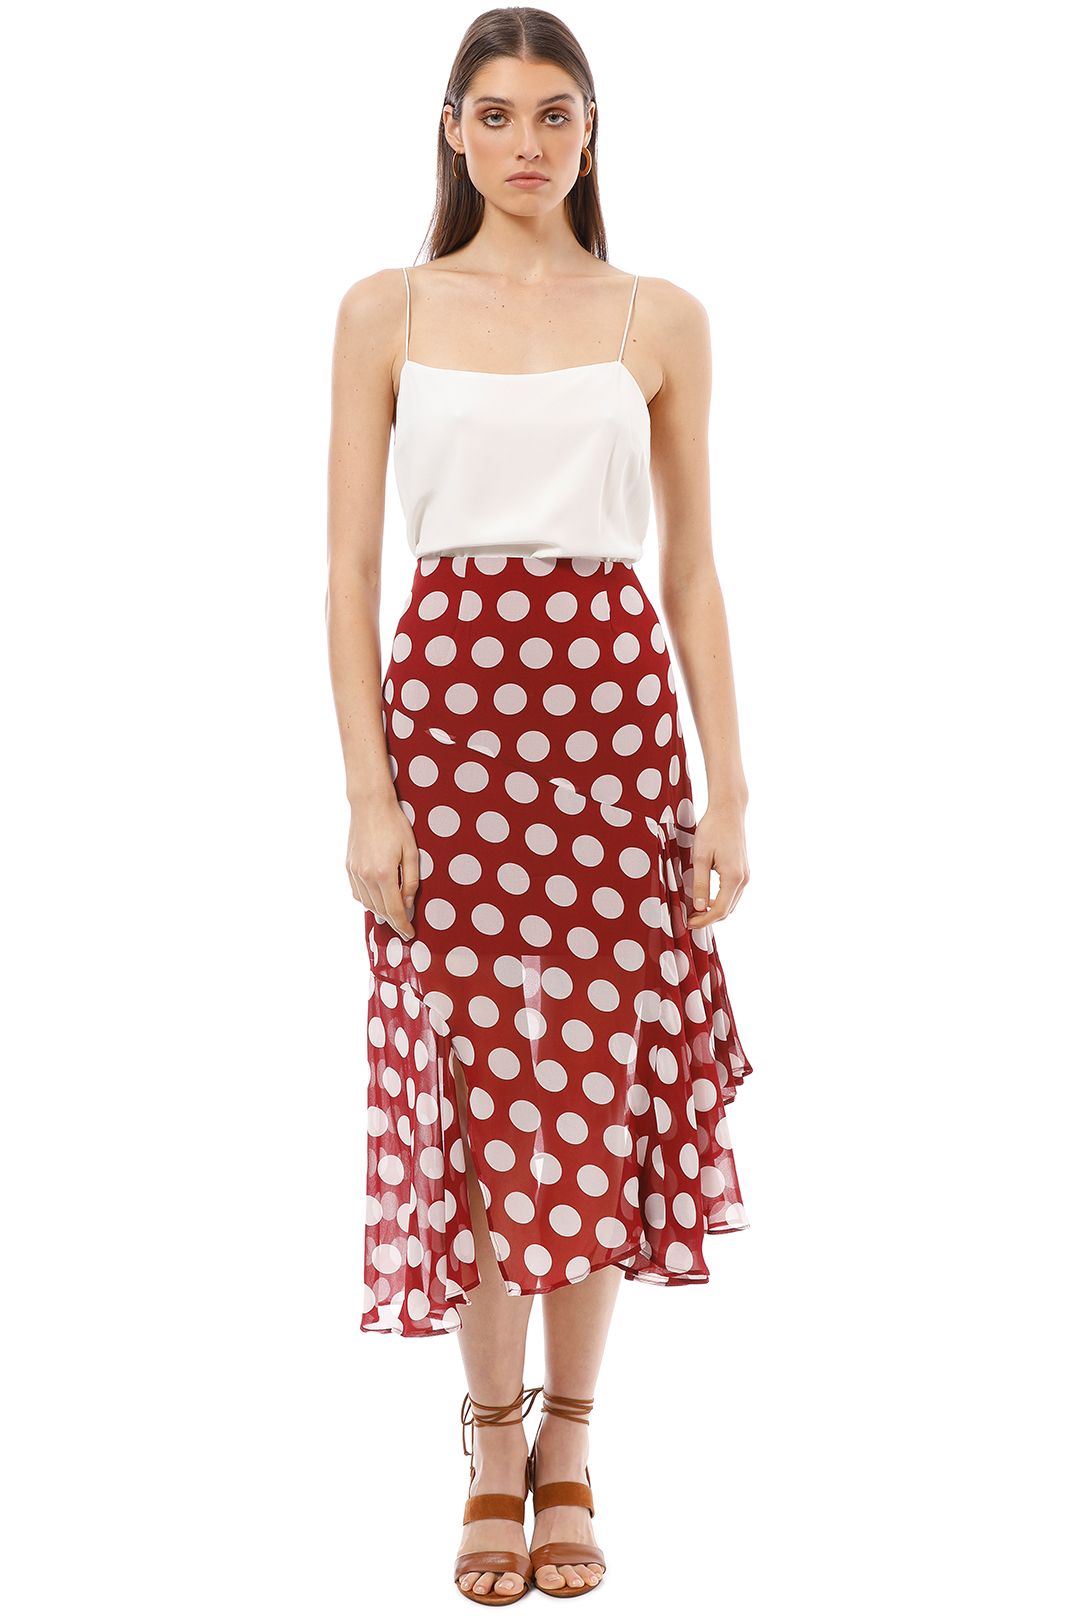 CMEO Collective - Unending Skirt - Red - Front